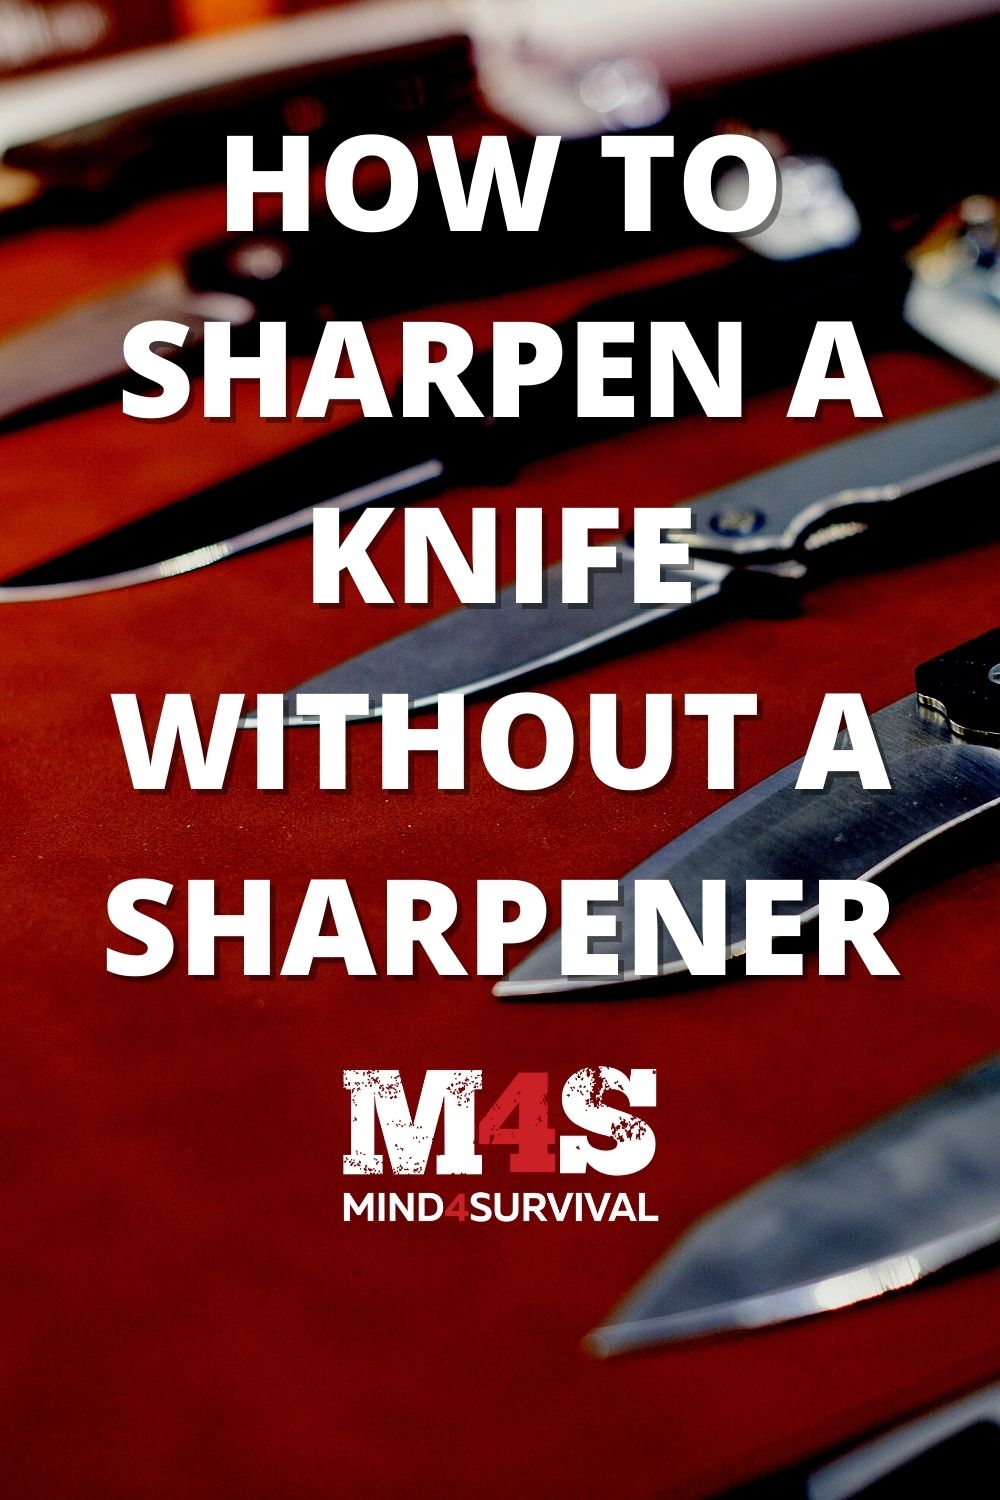 7 Best Ways: How to Sharpen a Knife Without a Sharpener